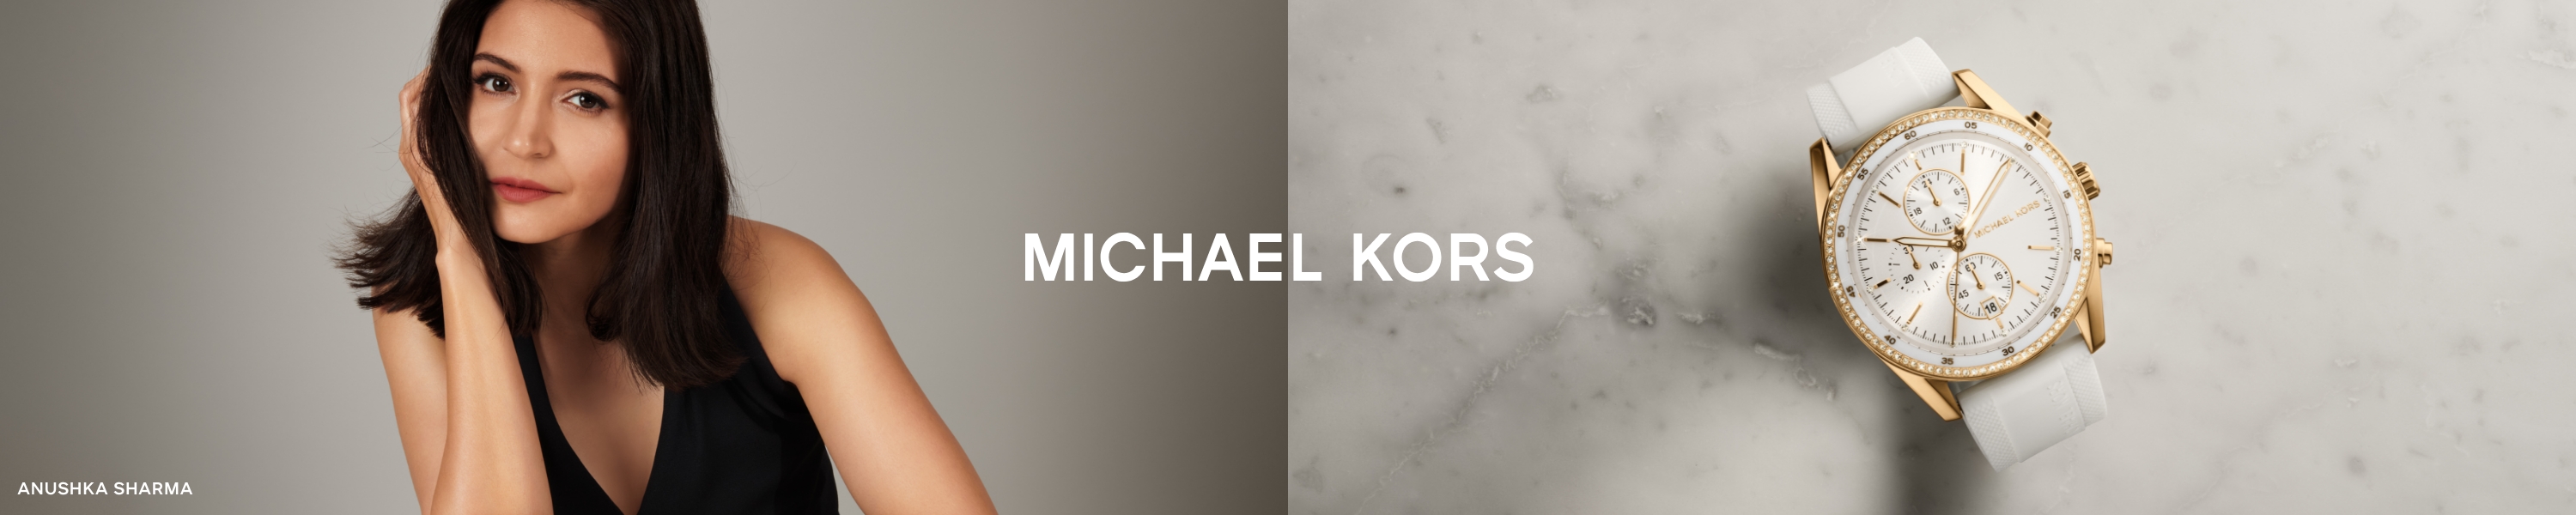 Michael Kors Watches and Jewelry